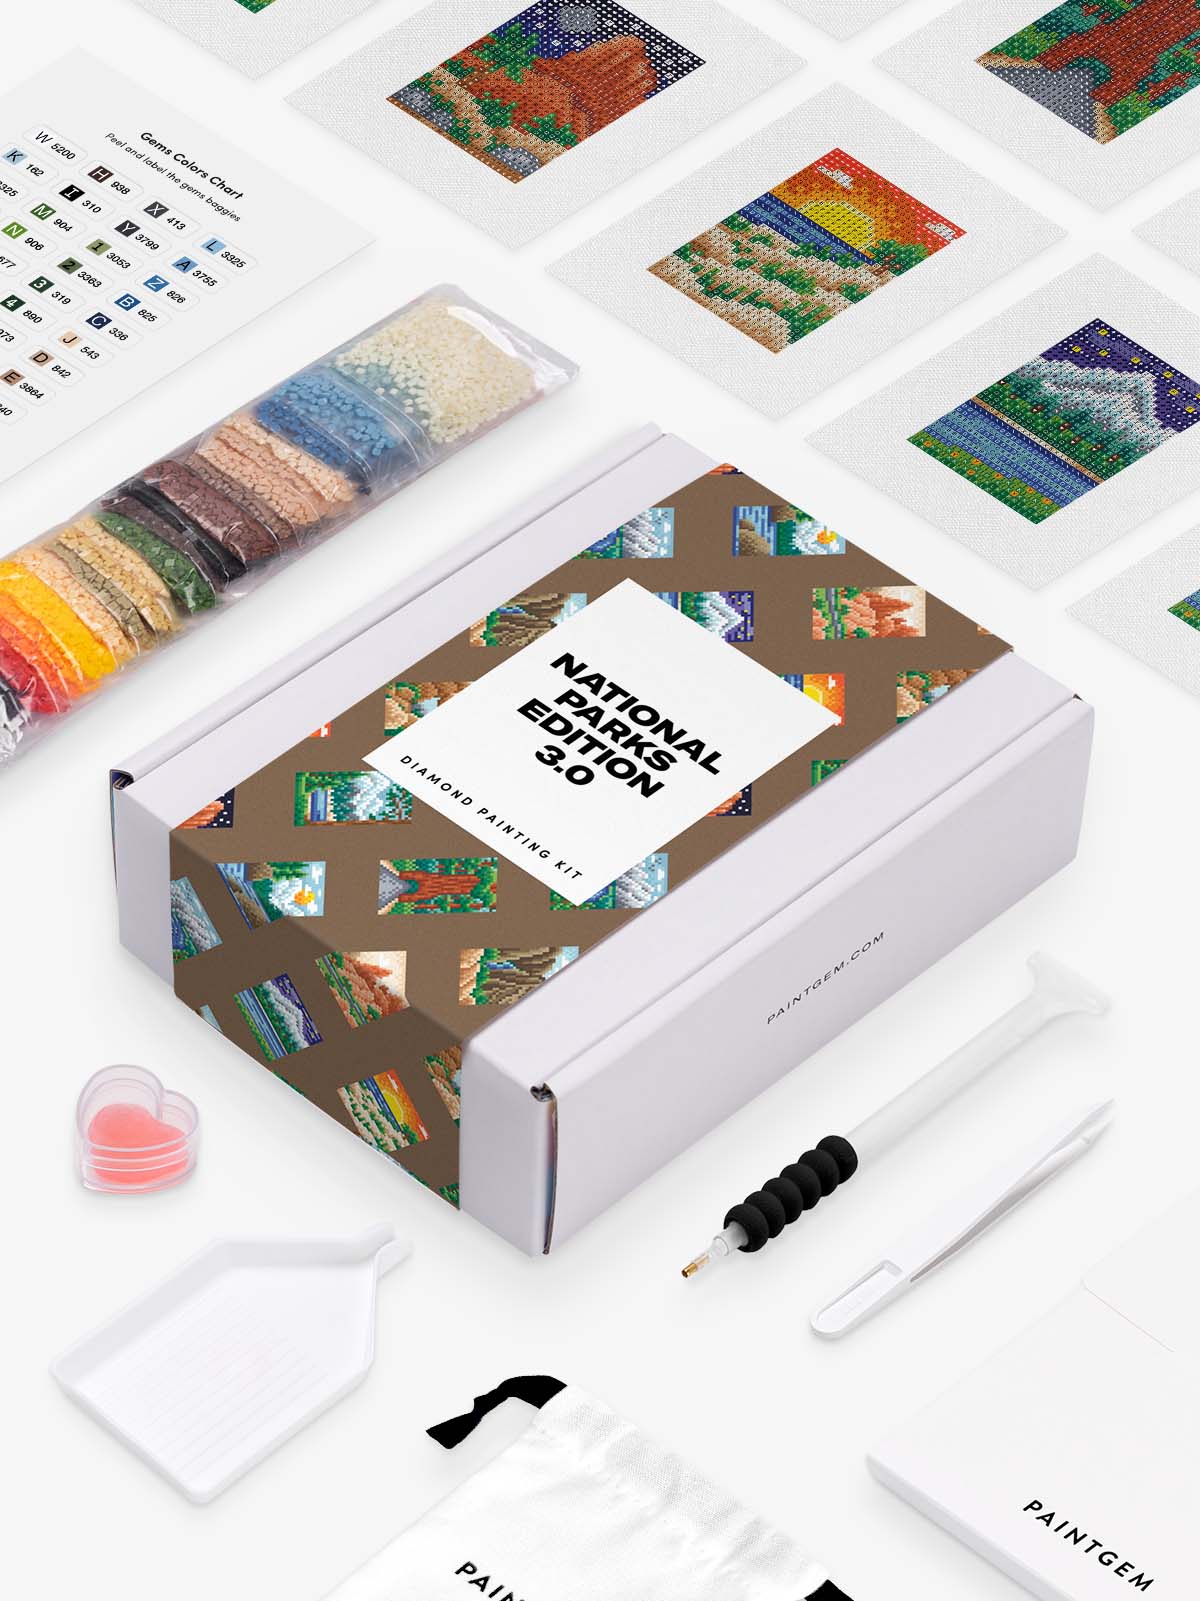 Diamond Painting Kits: Build Your Own Masterpiece With These Kits